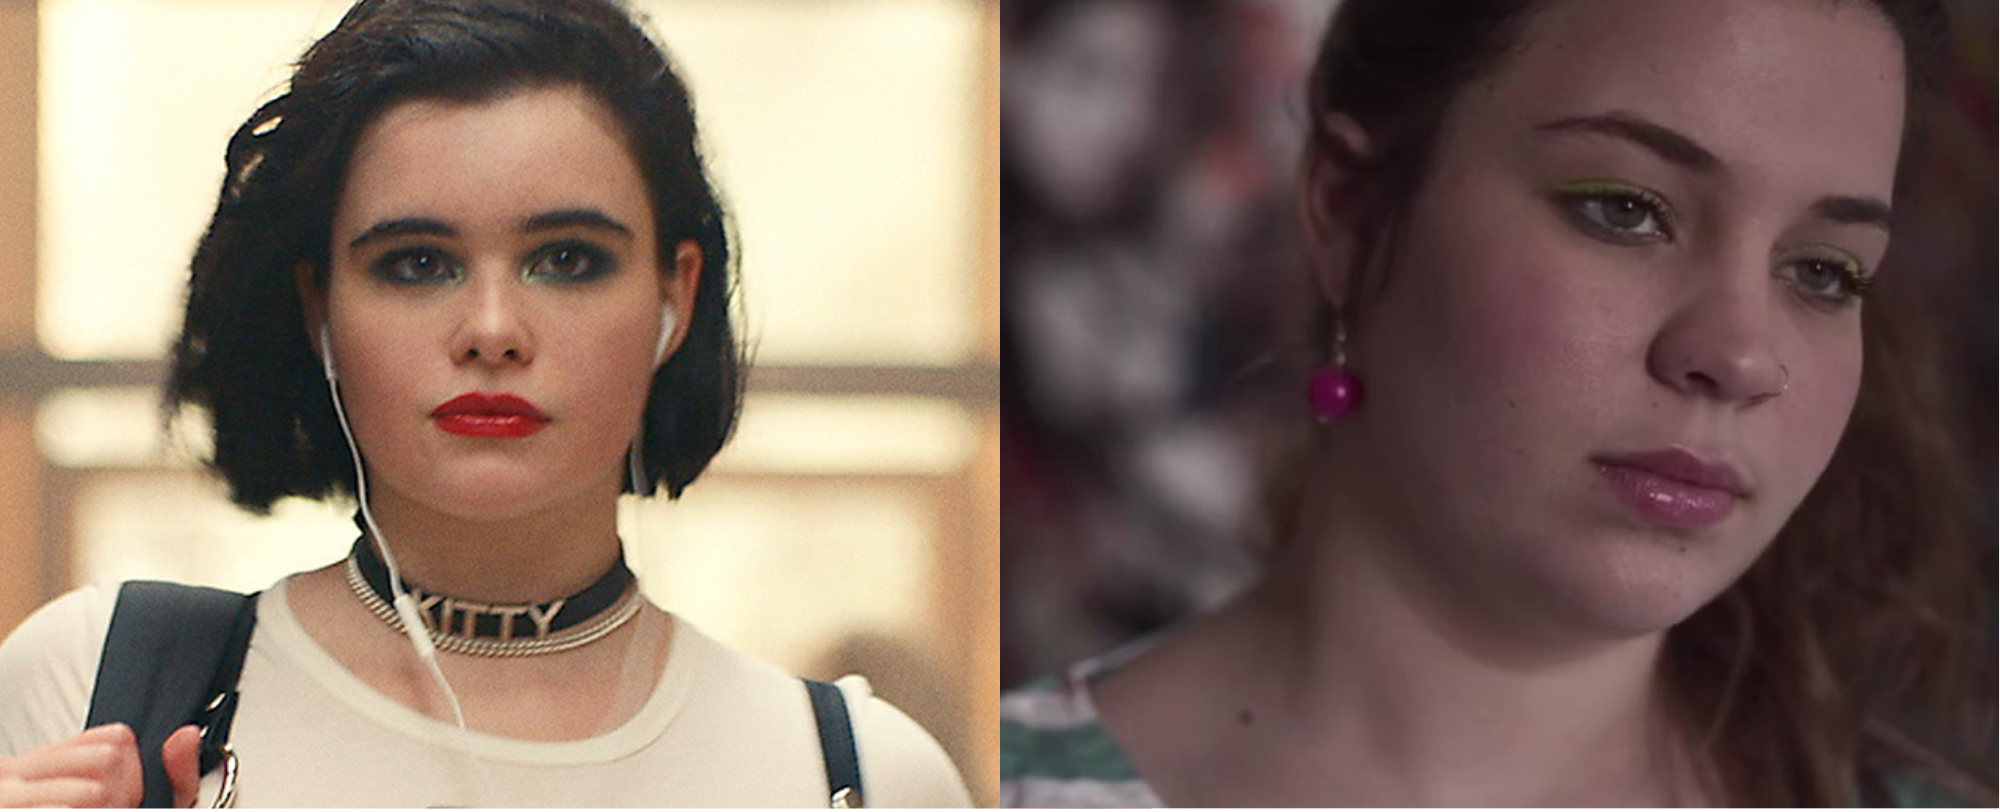 Barbara Ferreira  as Kat from Euphoria (U.S) on the left and Amit Erez as Noy Cohen in Euphoria (Israel) on the right.